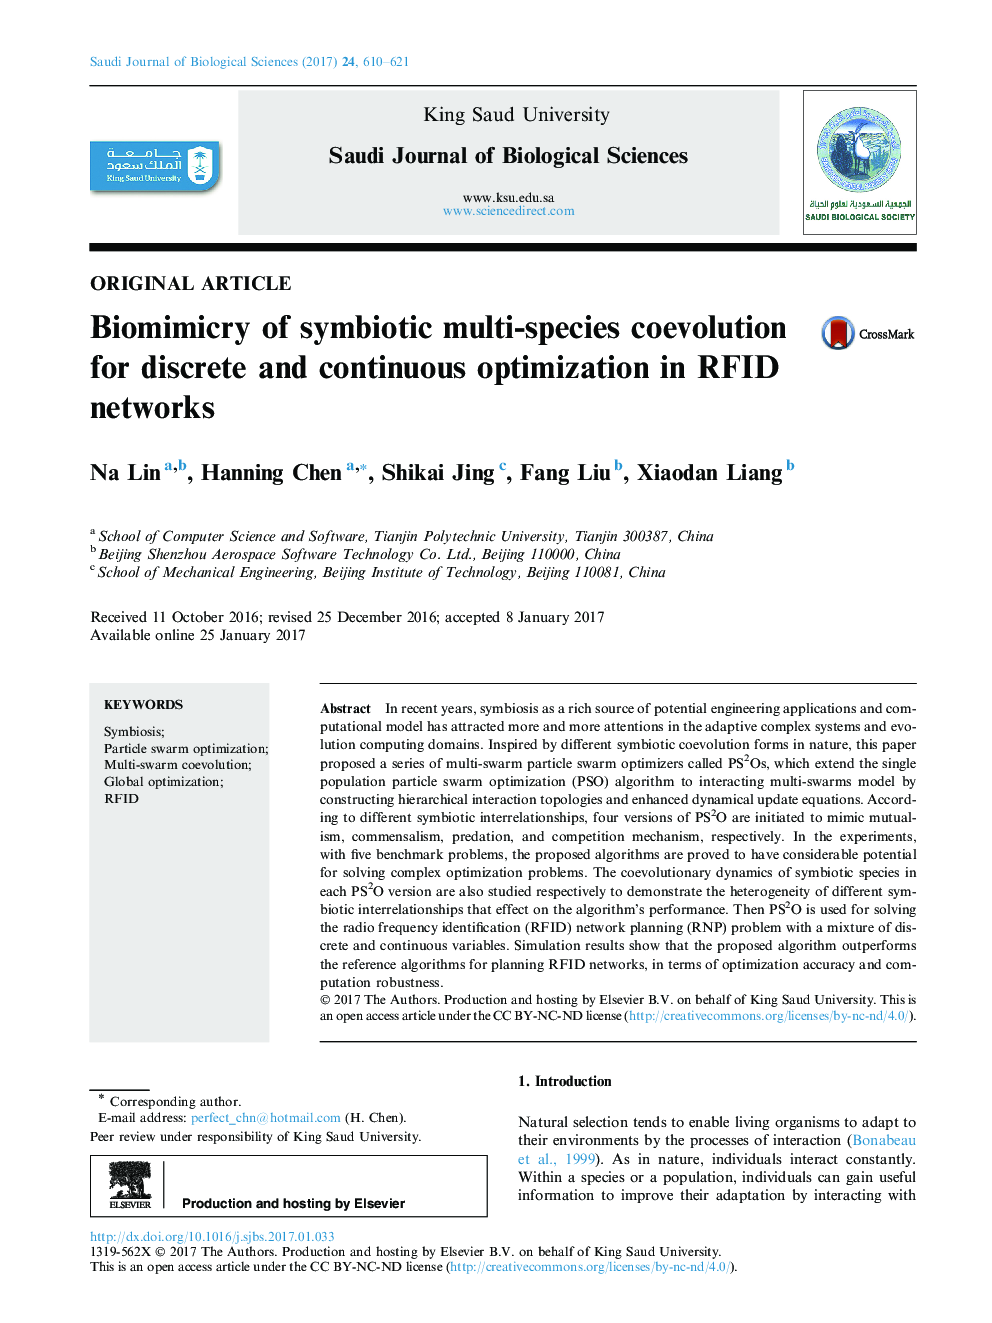 Original articleBiomimicry of symbiotic multi-species coevolution for discrete and continuous optimization in RFID networks